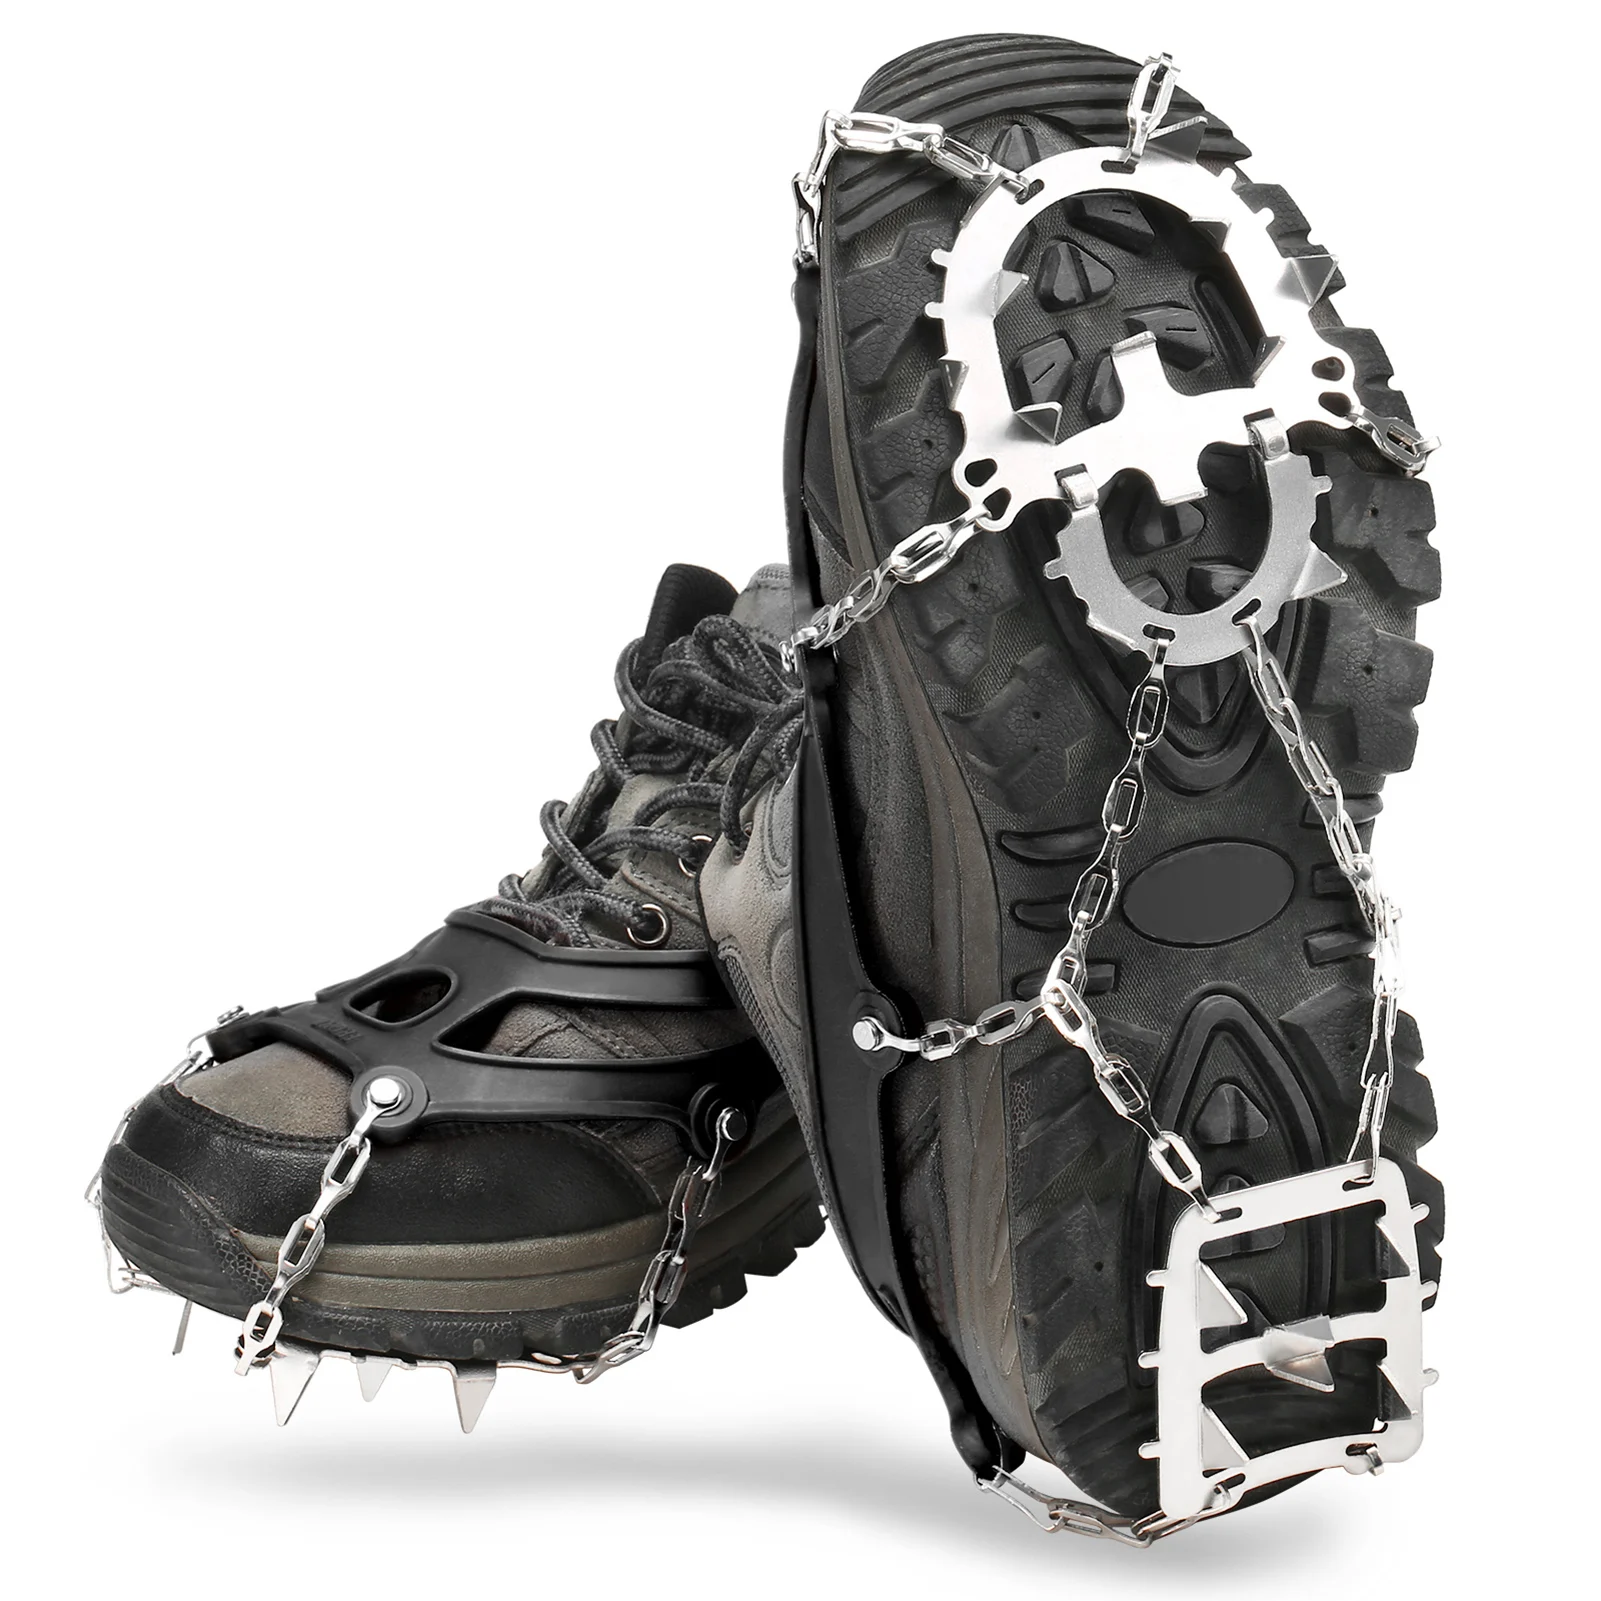 XREXS Universal 18 Teeth Stainless Steel Crampons Ice and Snow Cleats Grips Non-slip Shoes Cover with 18 Spikes and Adjustable Strap for Walking Jogging Climbing and Hiking Unisex 